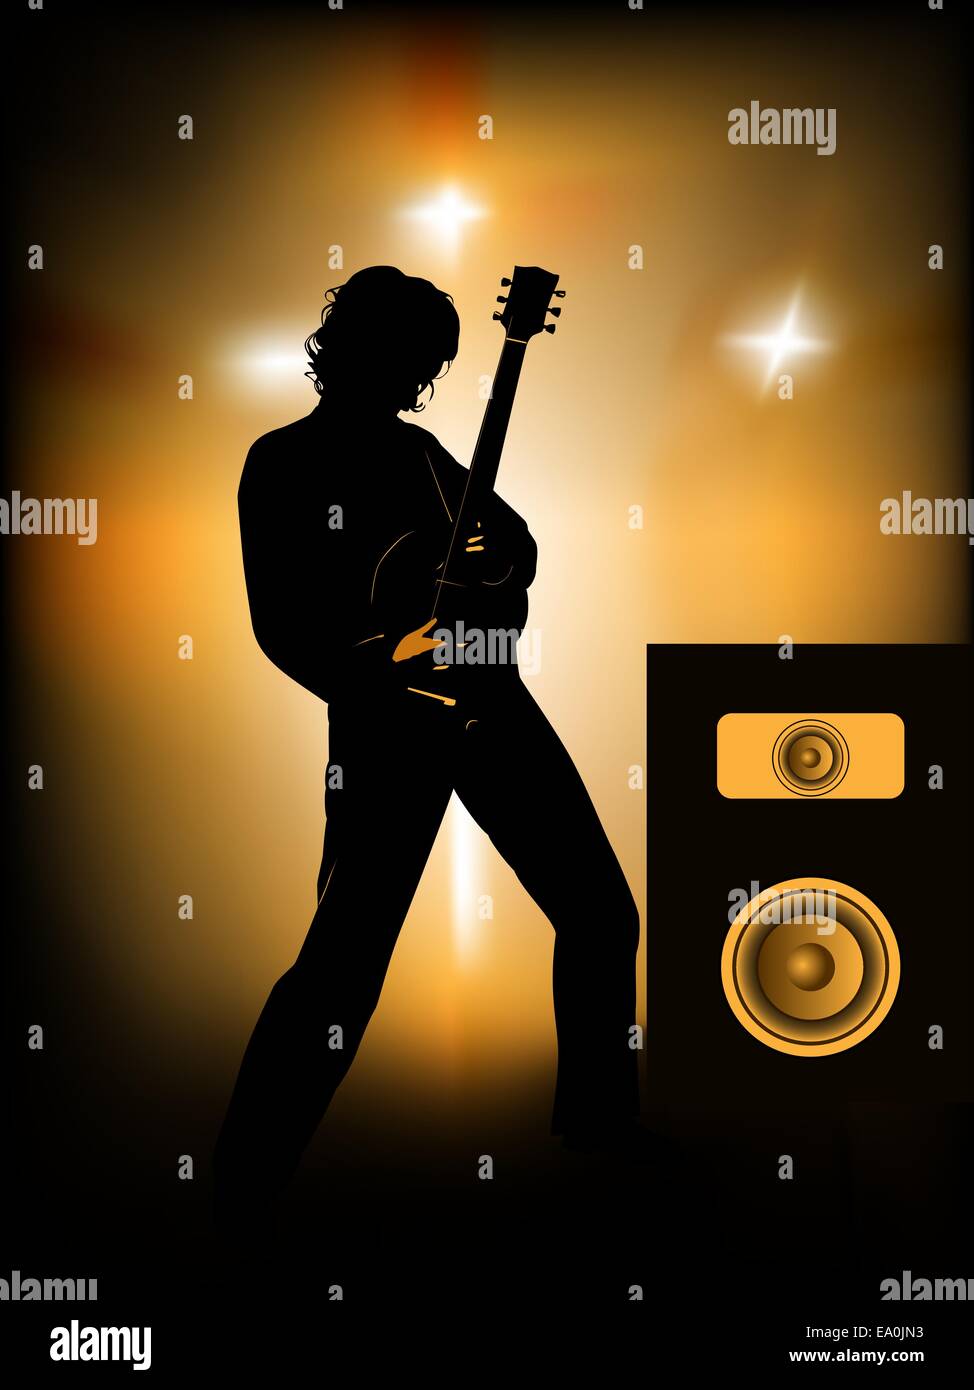 vector silhouette of guitar player on stage Stock Vector